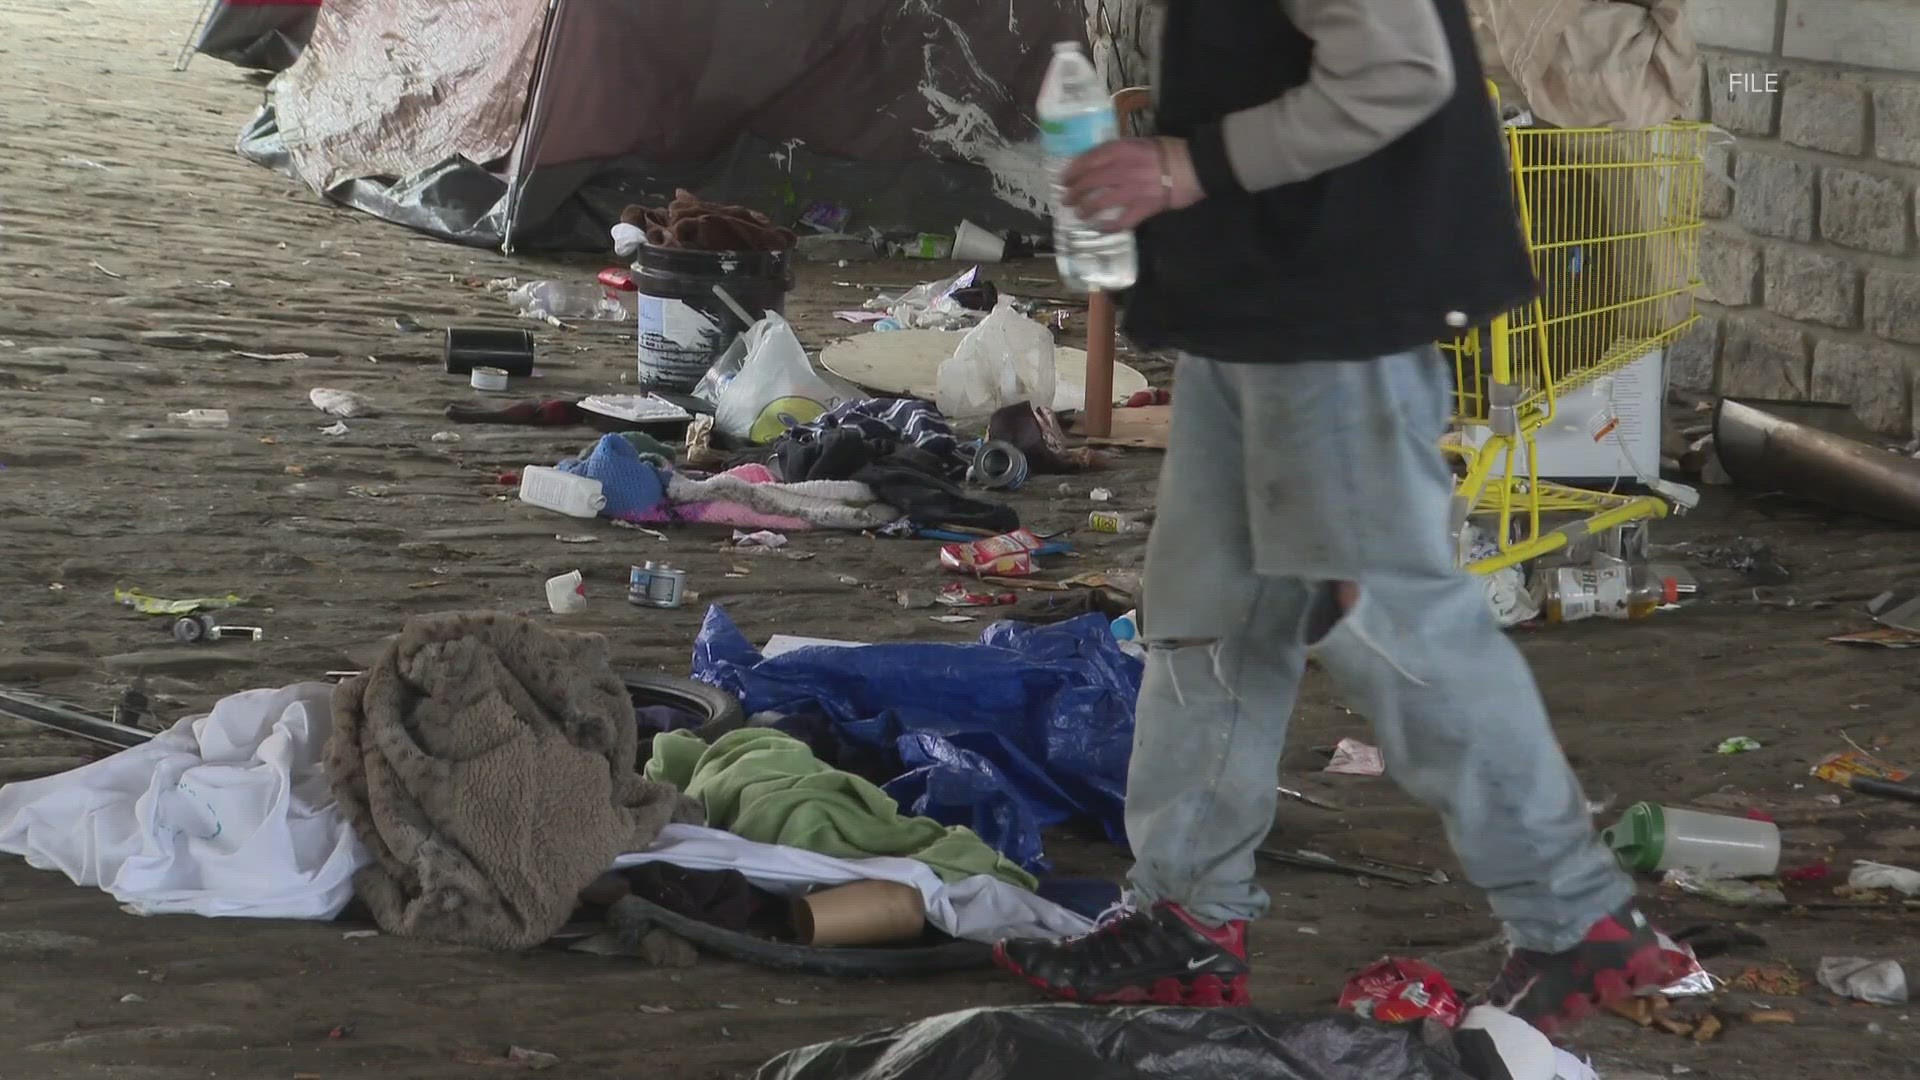 After a string of fires in Louisville, officials are urging everyone to be aware of fire risks. Here's how organizations are helping the homeless this winter.